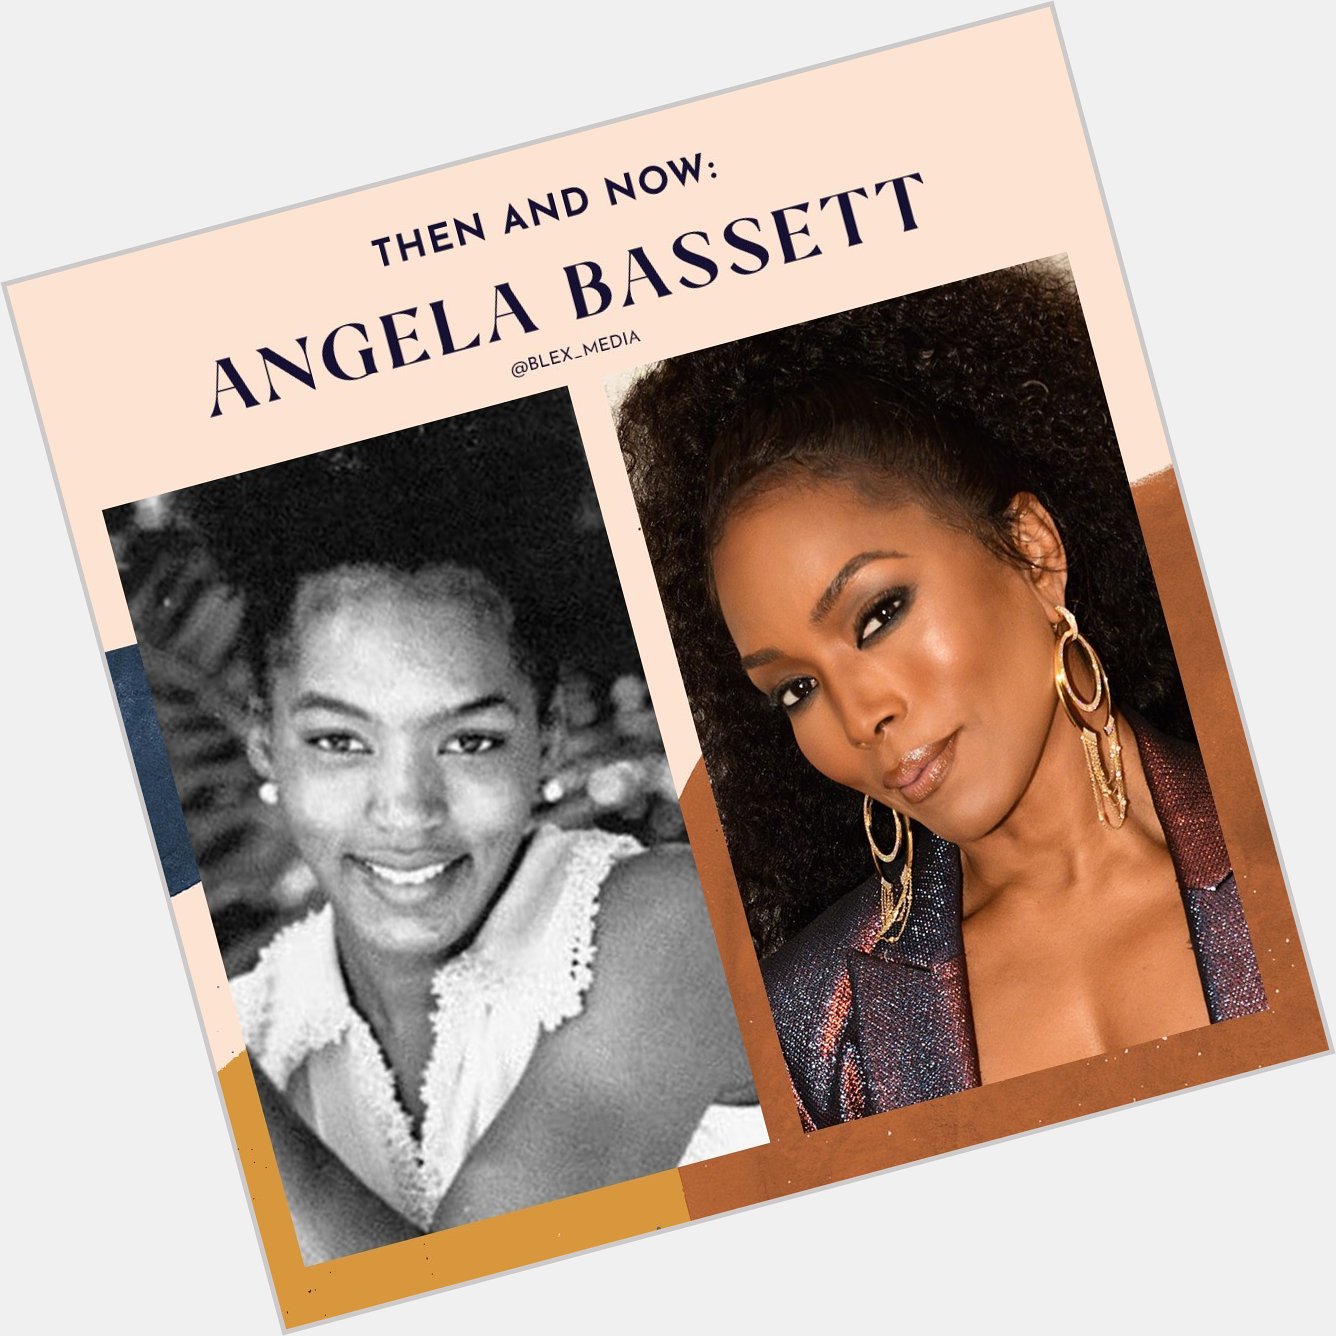 Happy Birthday to the ageless beauty, Angela Bassett! She\s 62 years young today! 